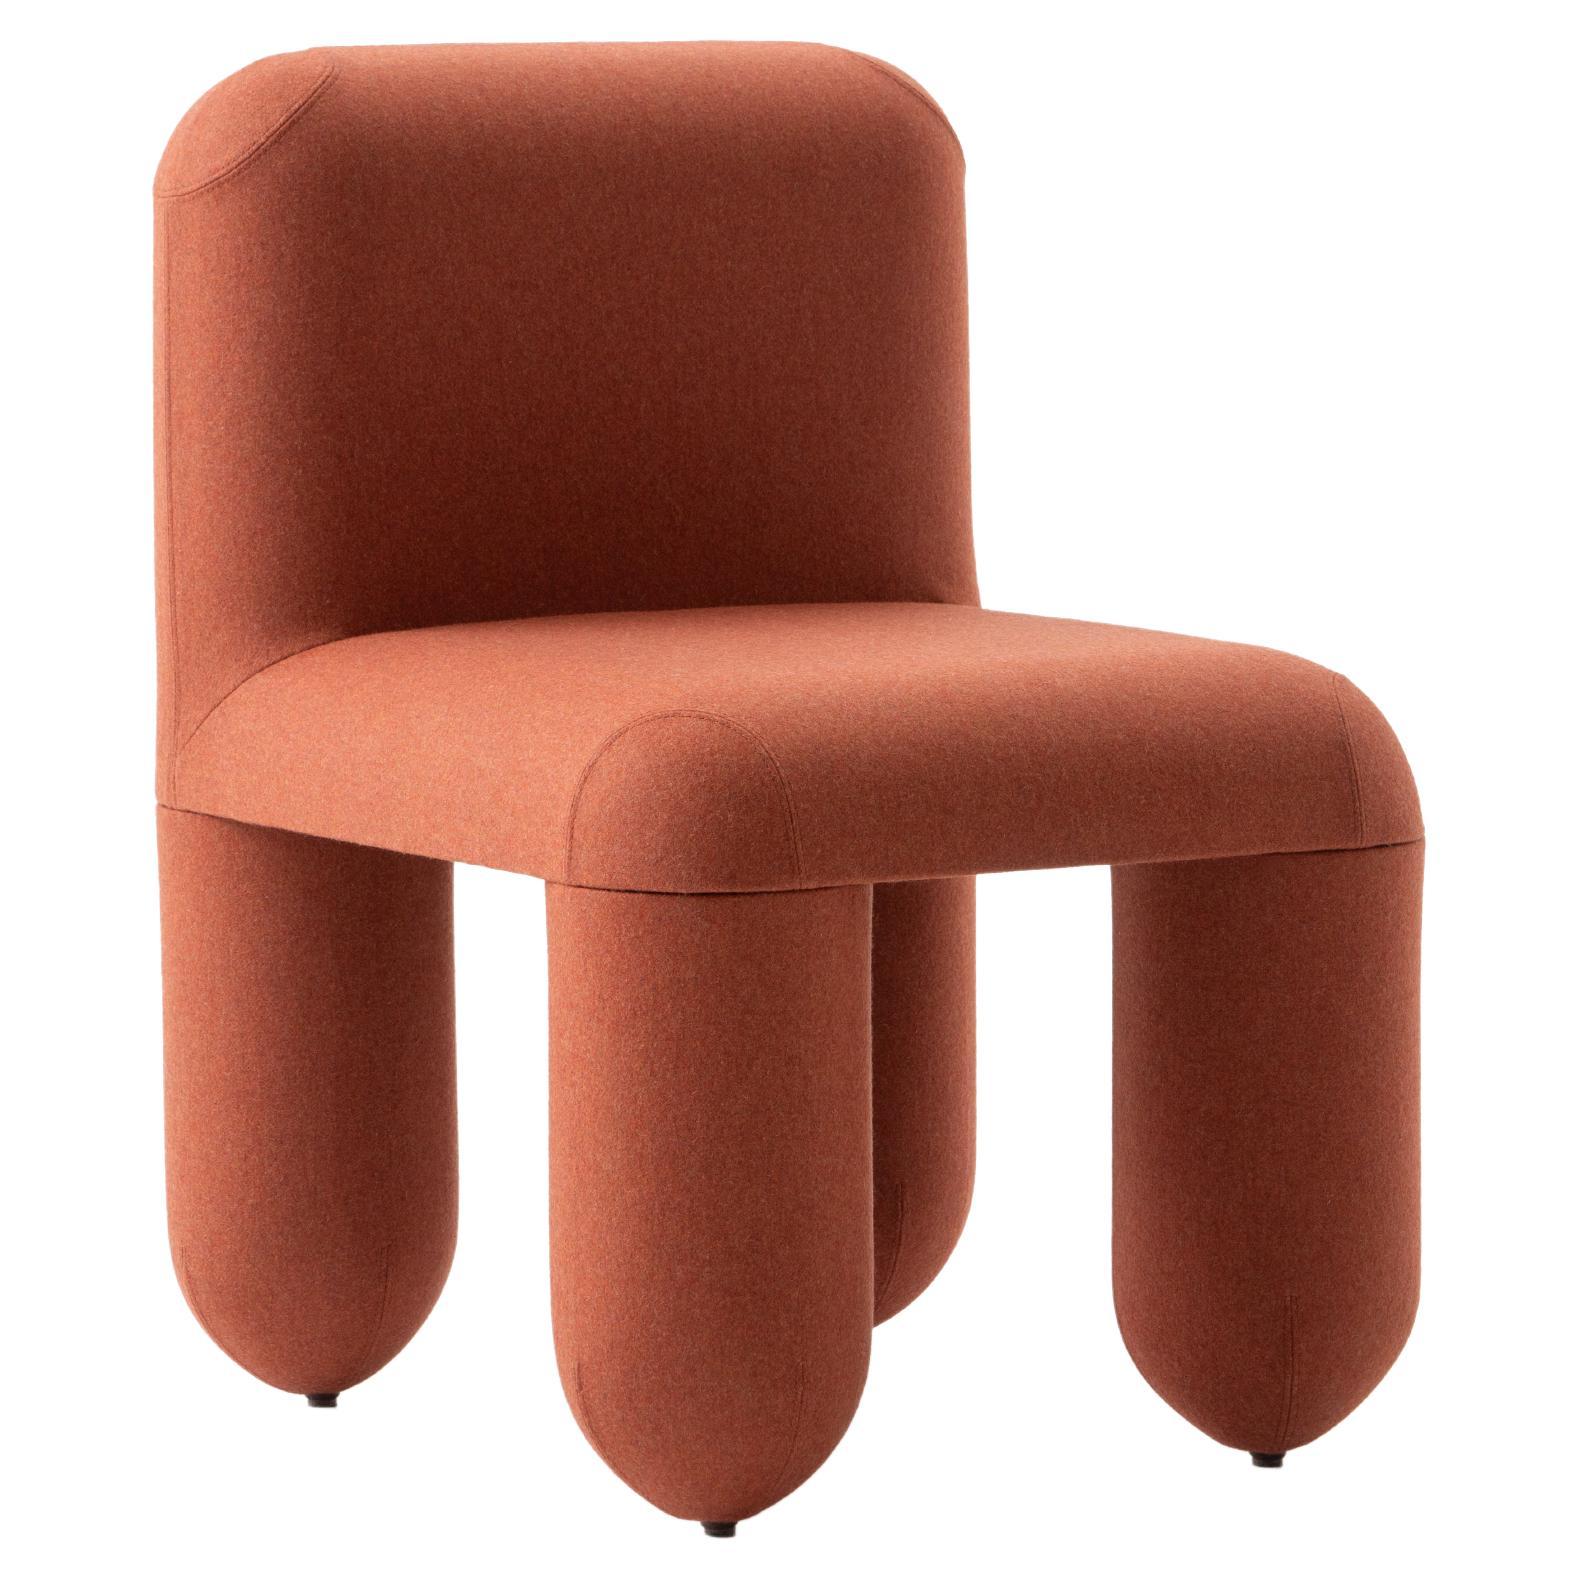 Contemporary Dining Chair 'Hello' by Denys Sokolov x Noom, Orange For Sale